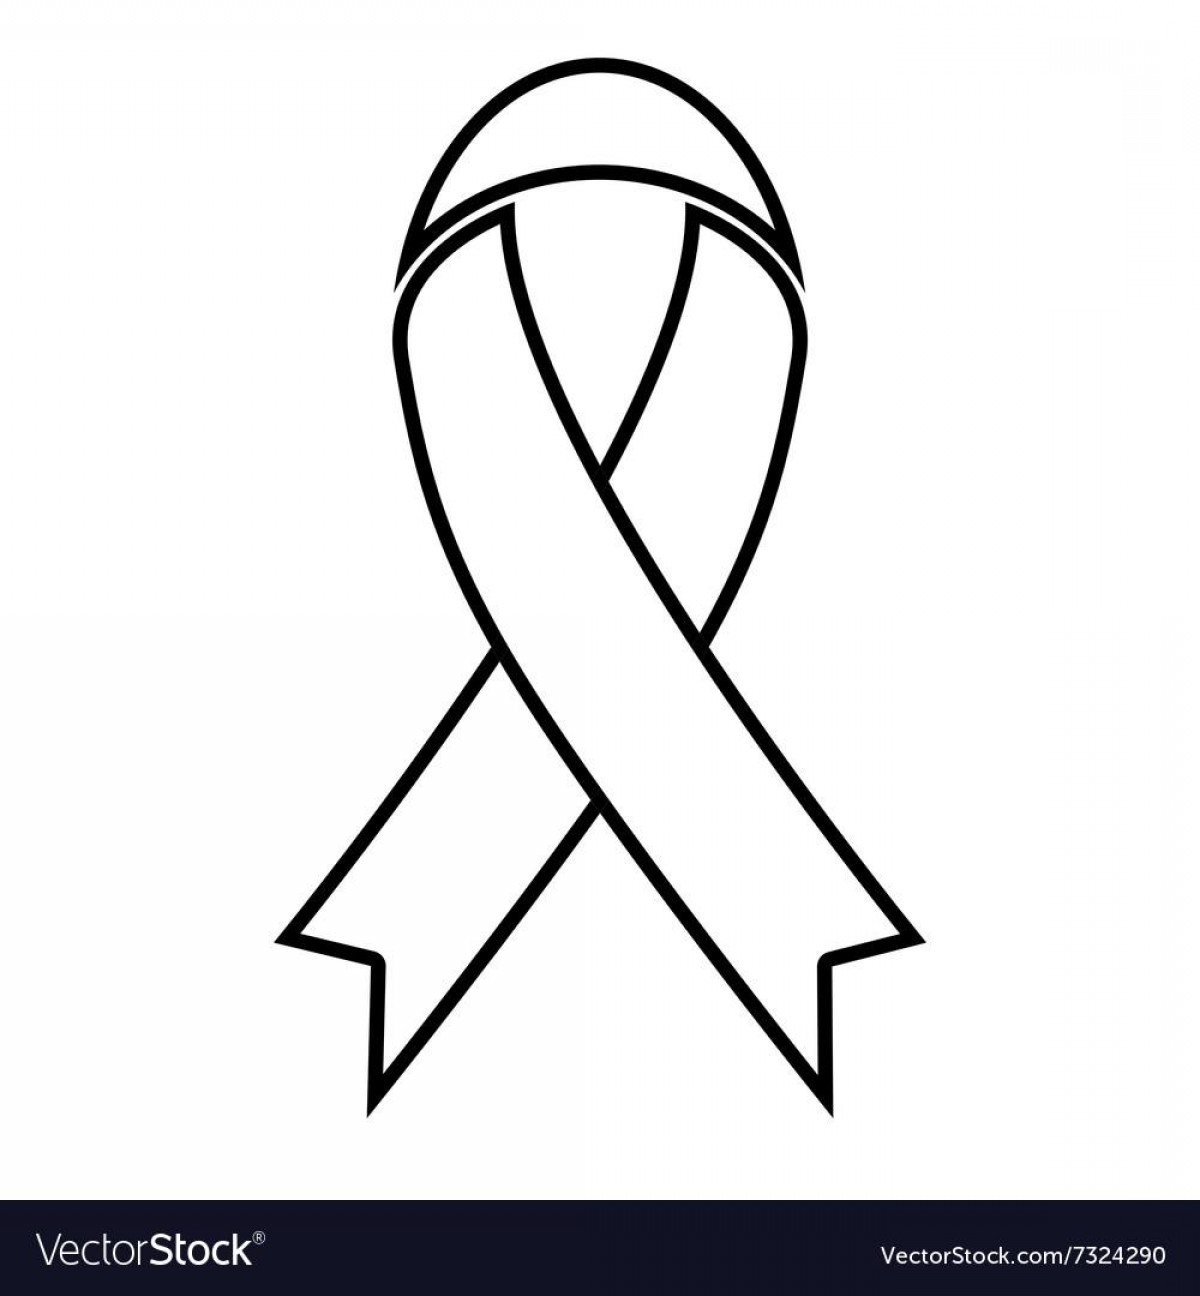 Cancer Ribbon Outline Vector at Collection of Cancer